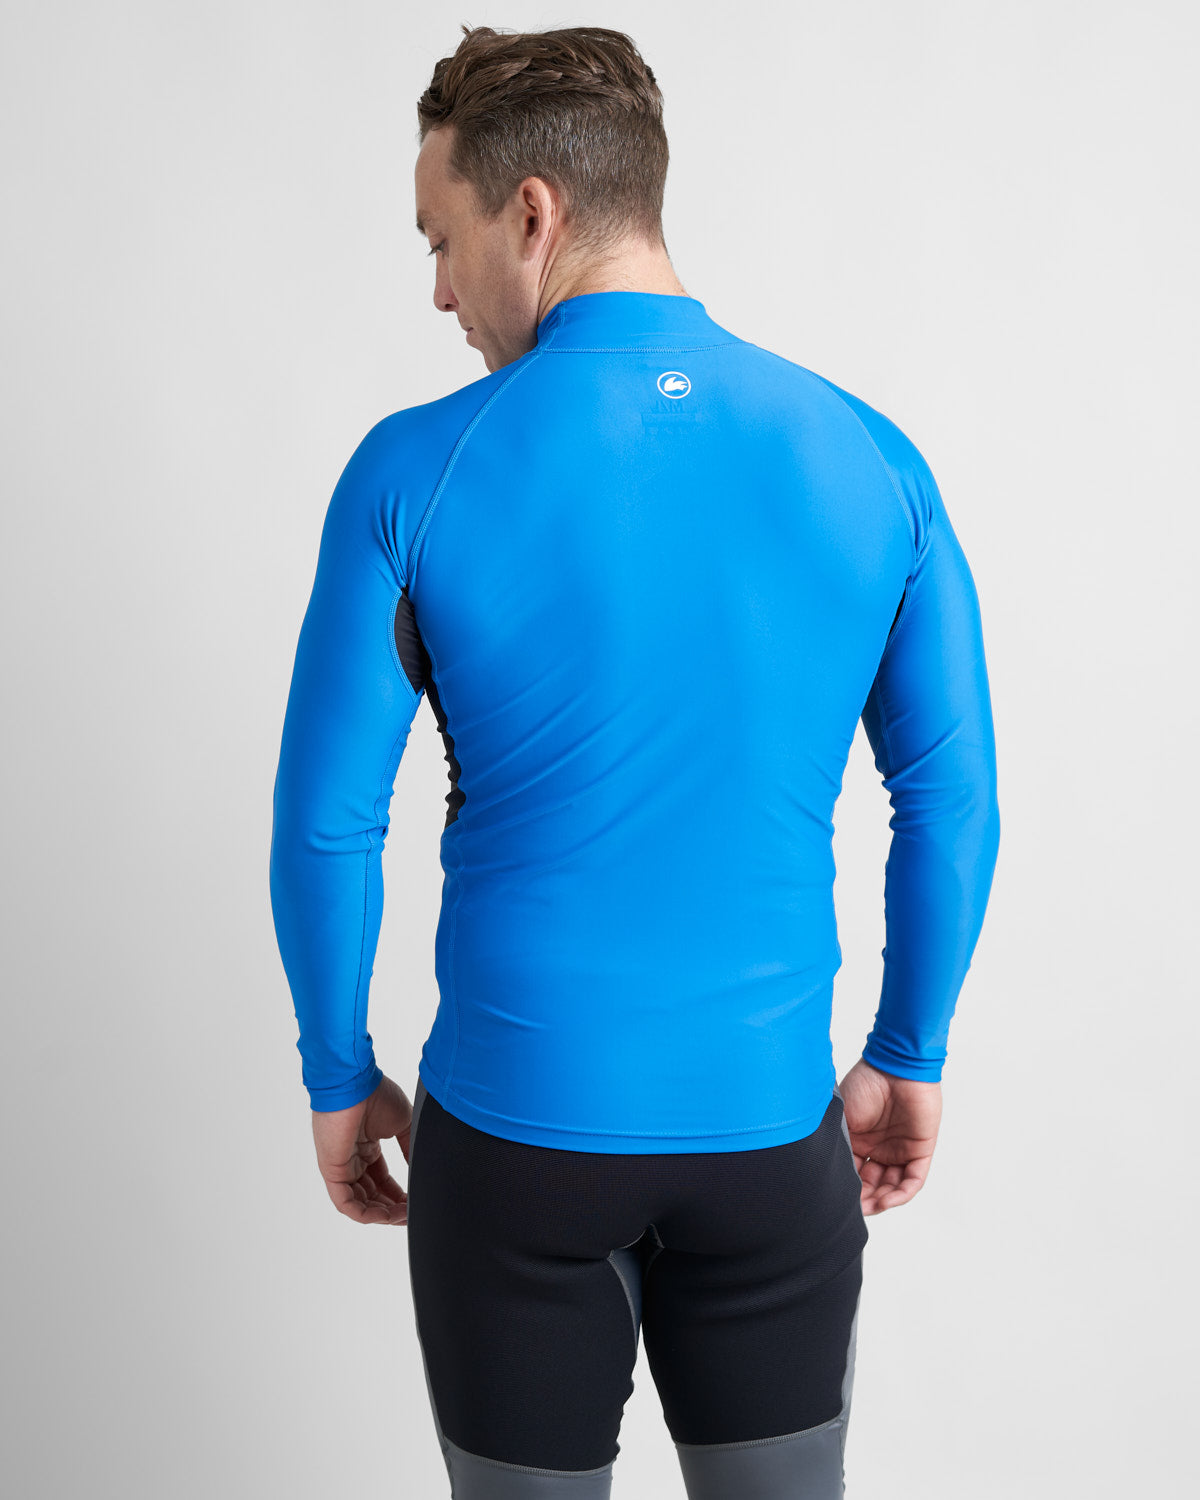 Rash Top-Long Sleeved – ROOSTER USA